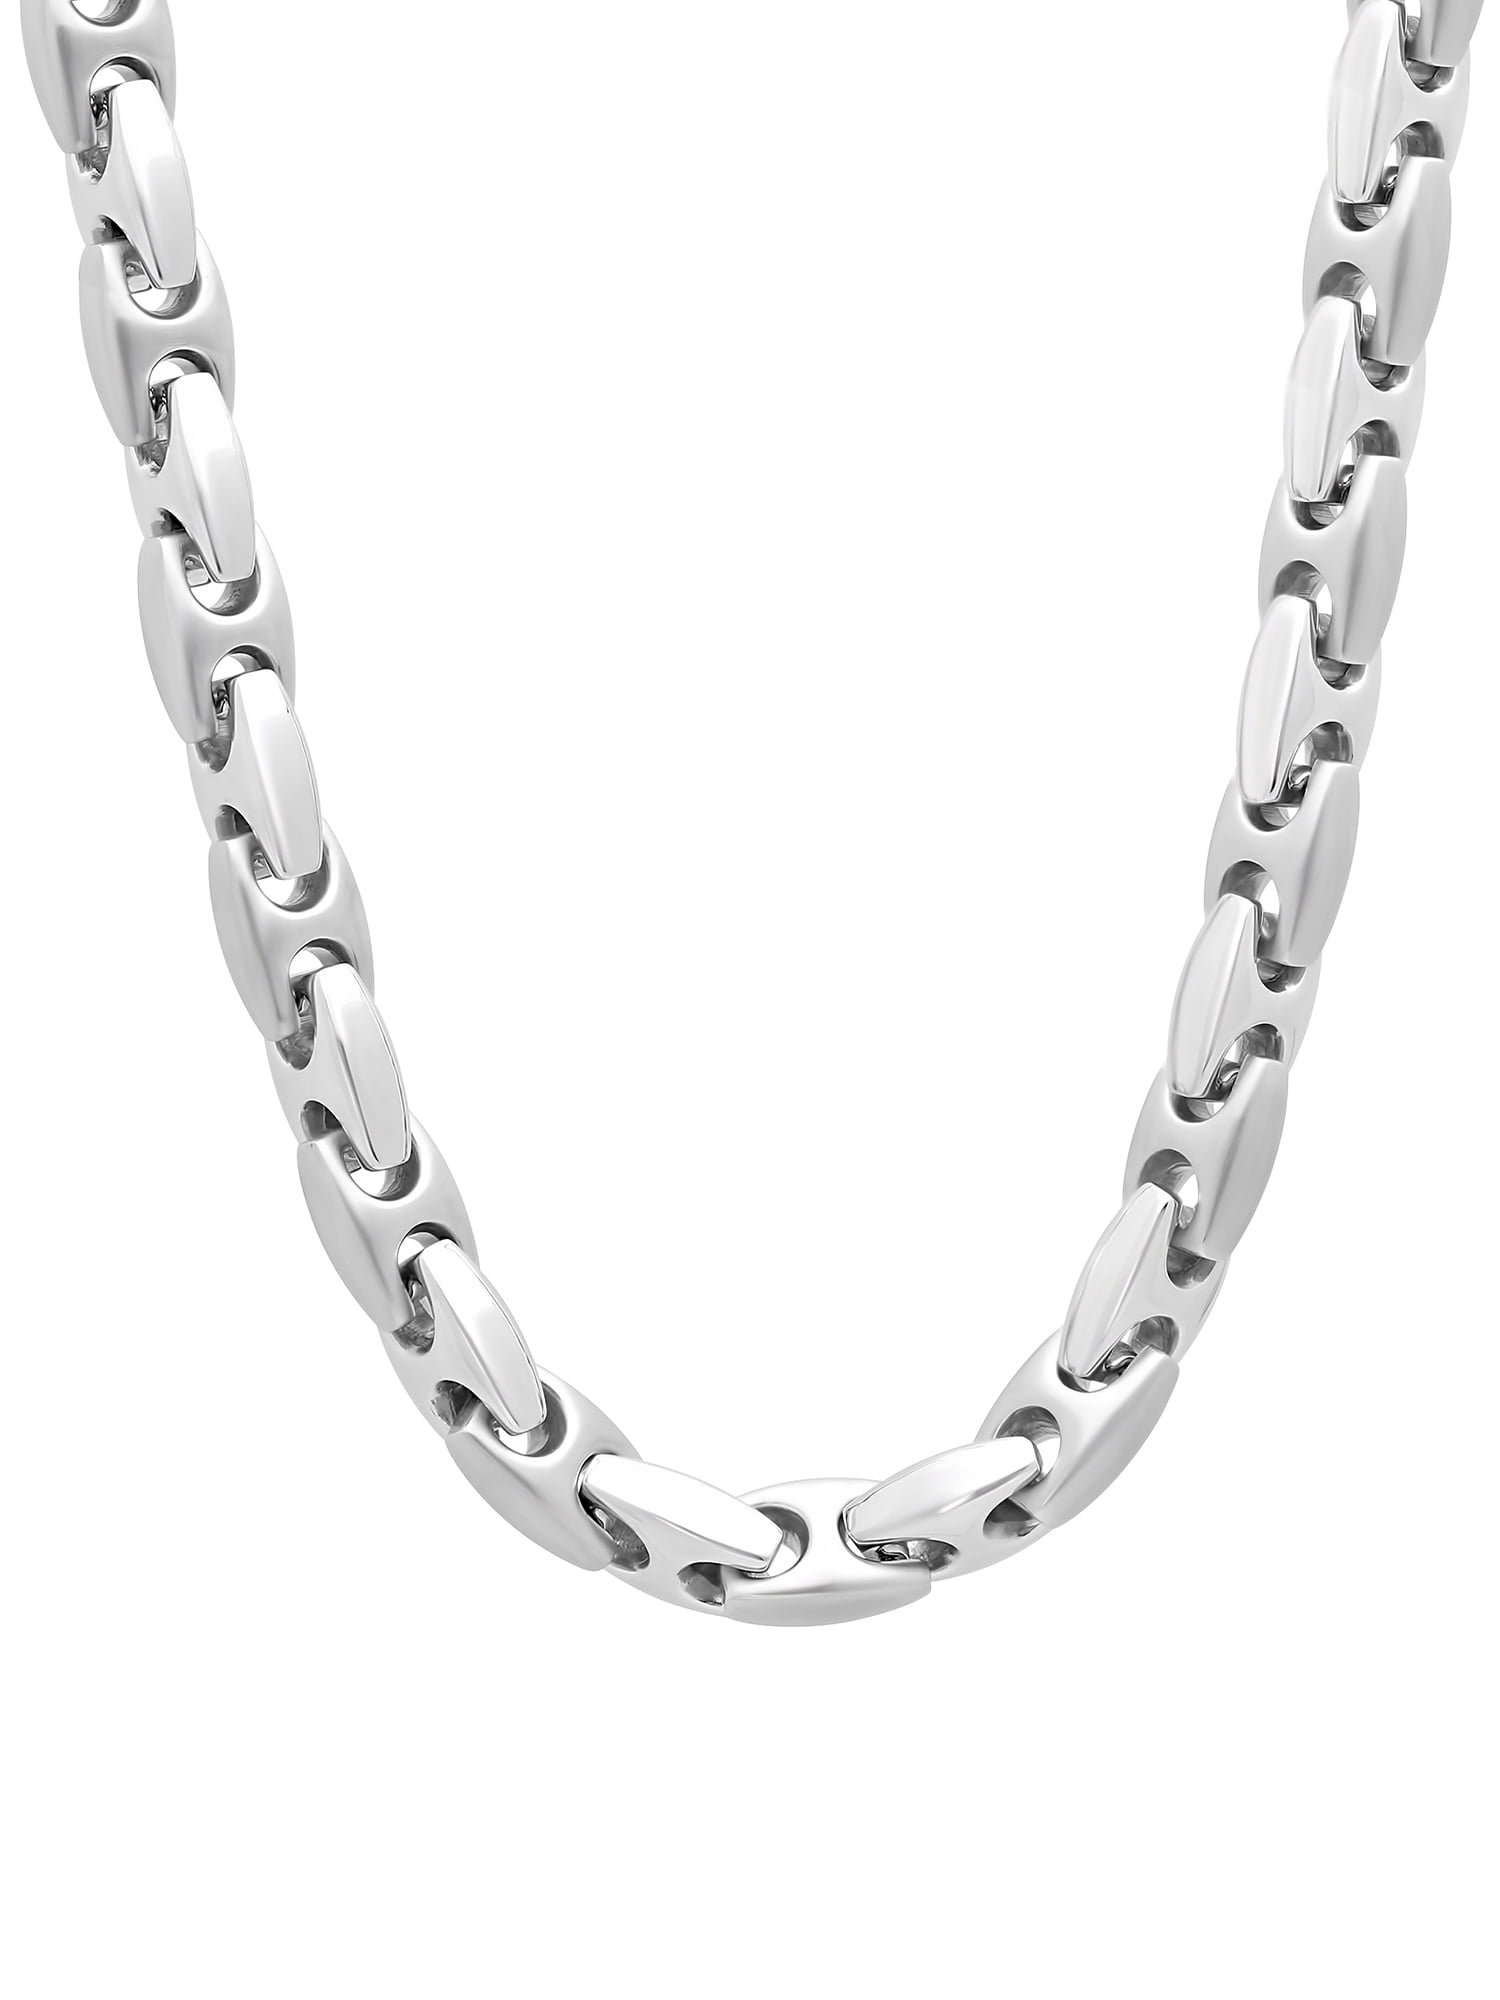 5pk Stainless Steel Chains, 24 inch, 3x4 Oval Links, Stainless Steel Necklace, Stainless Chain, Shiny Steel Chain, Stainless, SSC3x4.24